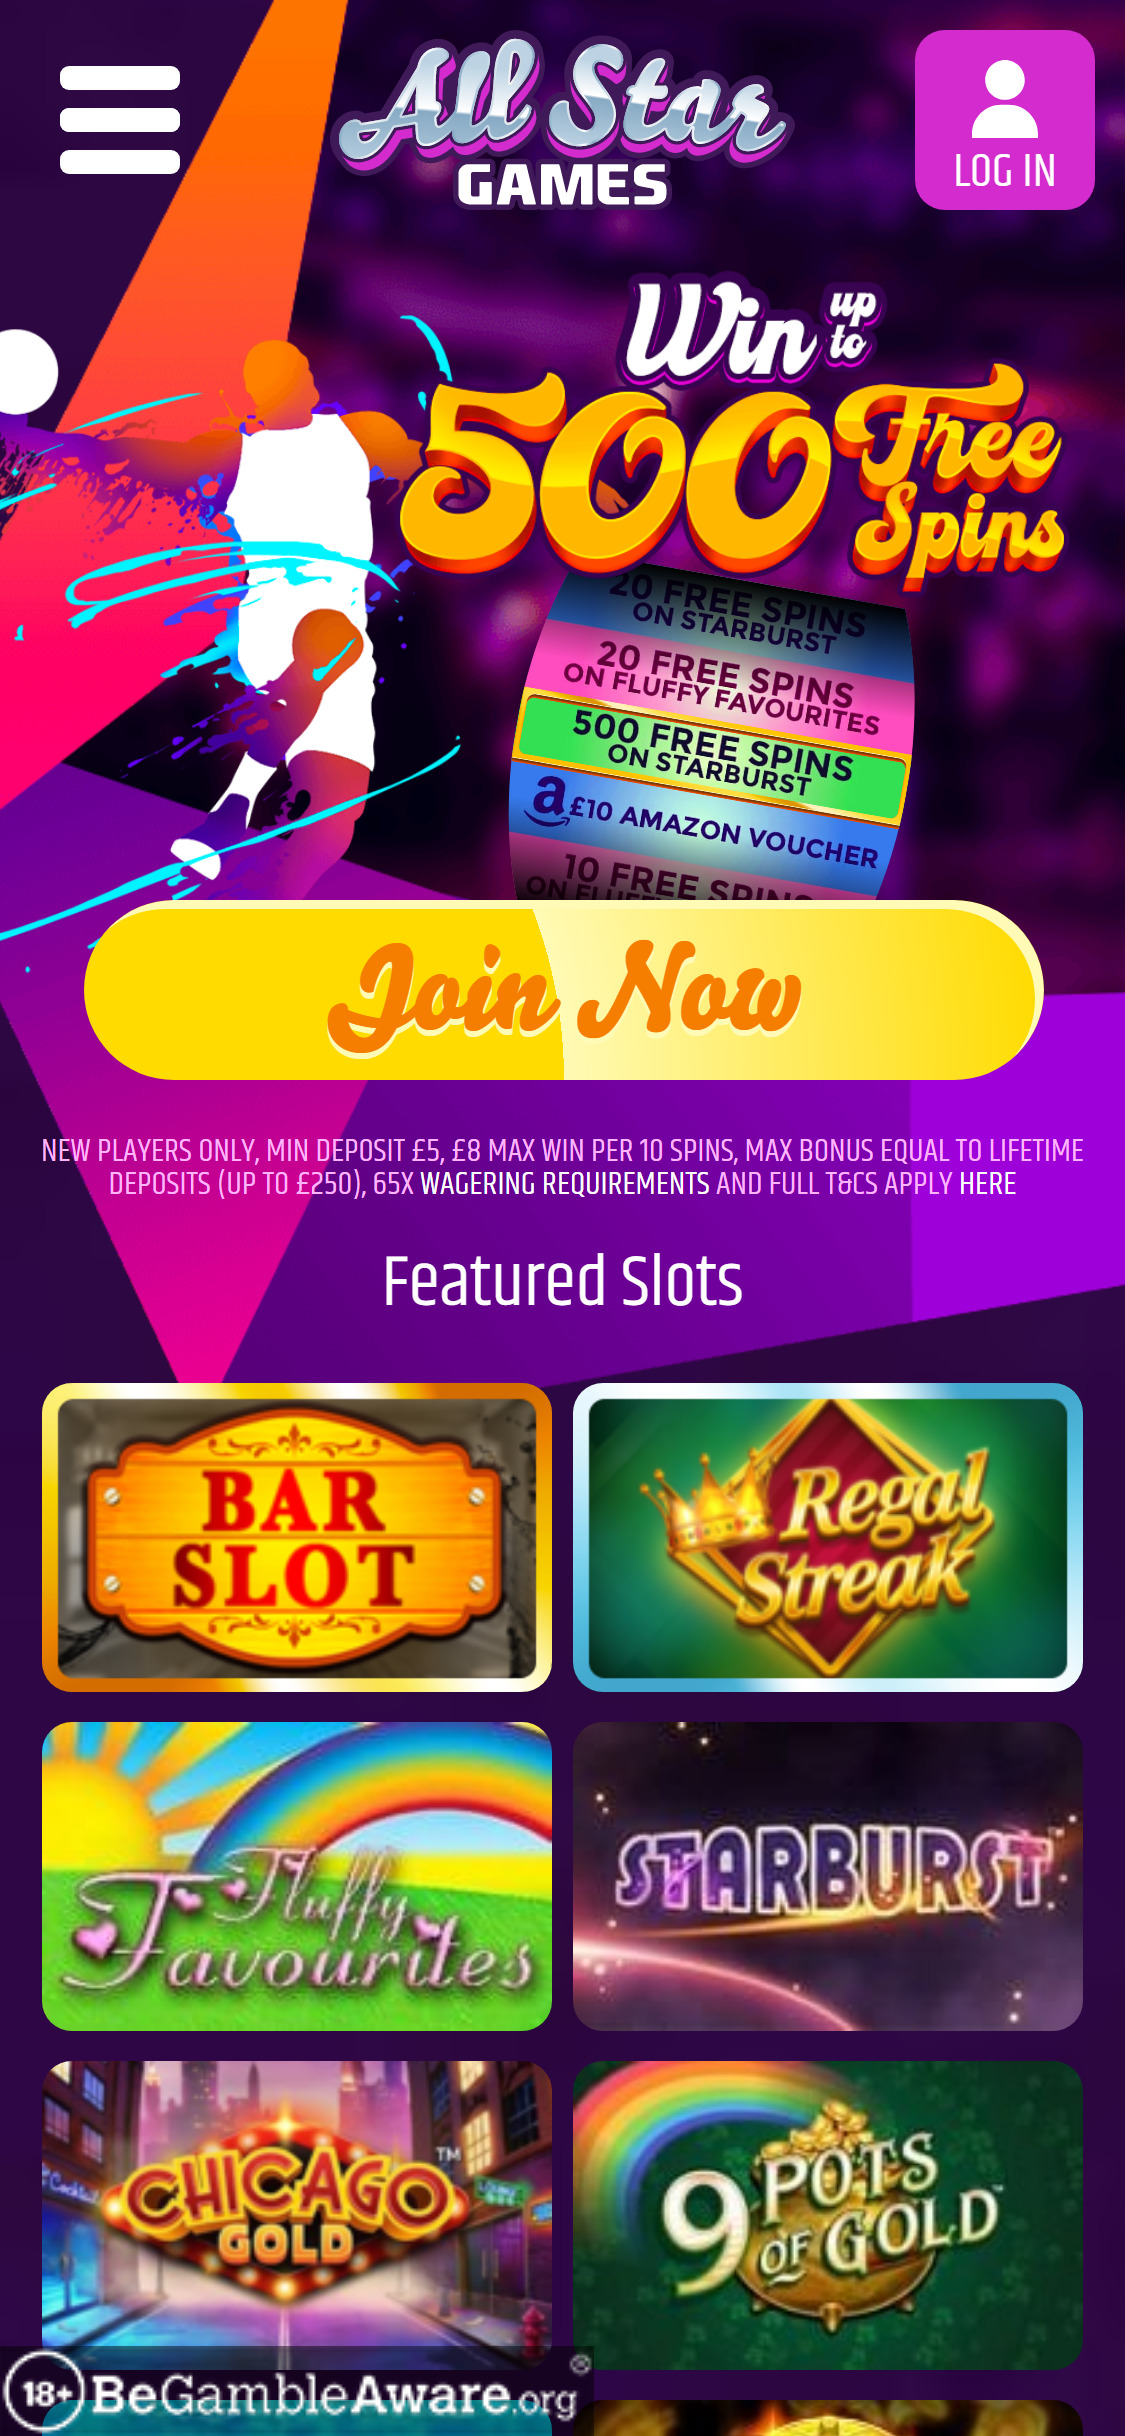 All Star Games Casino Mobile Login Review